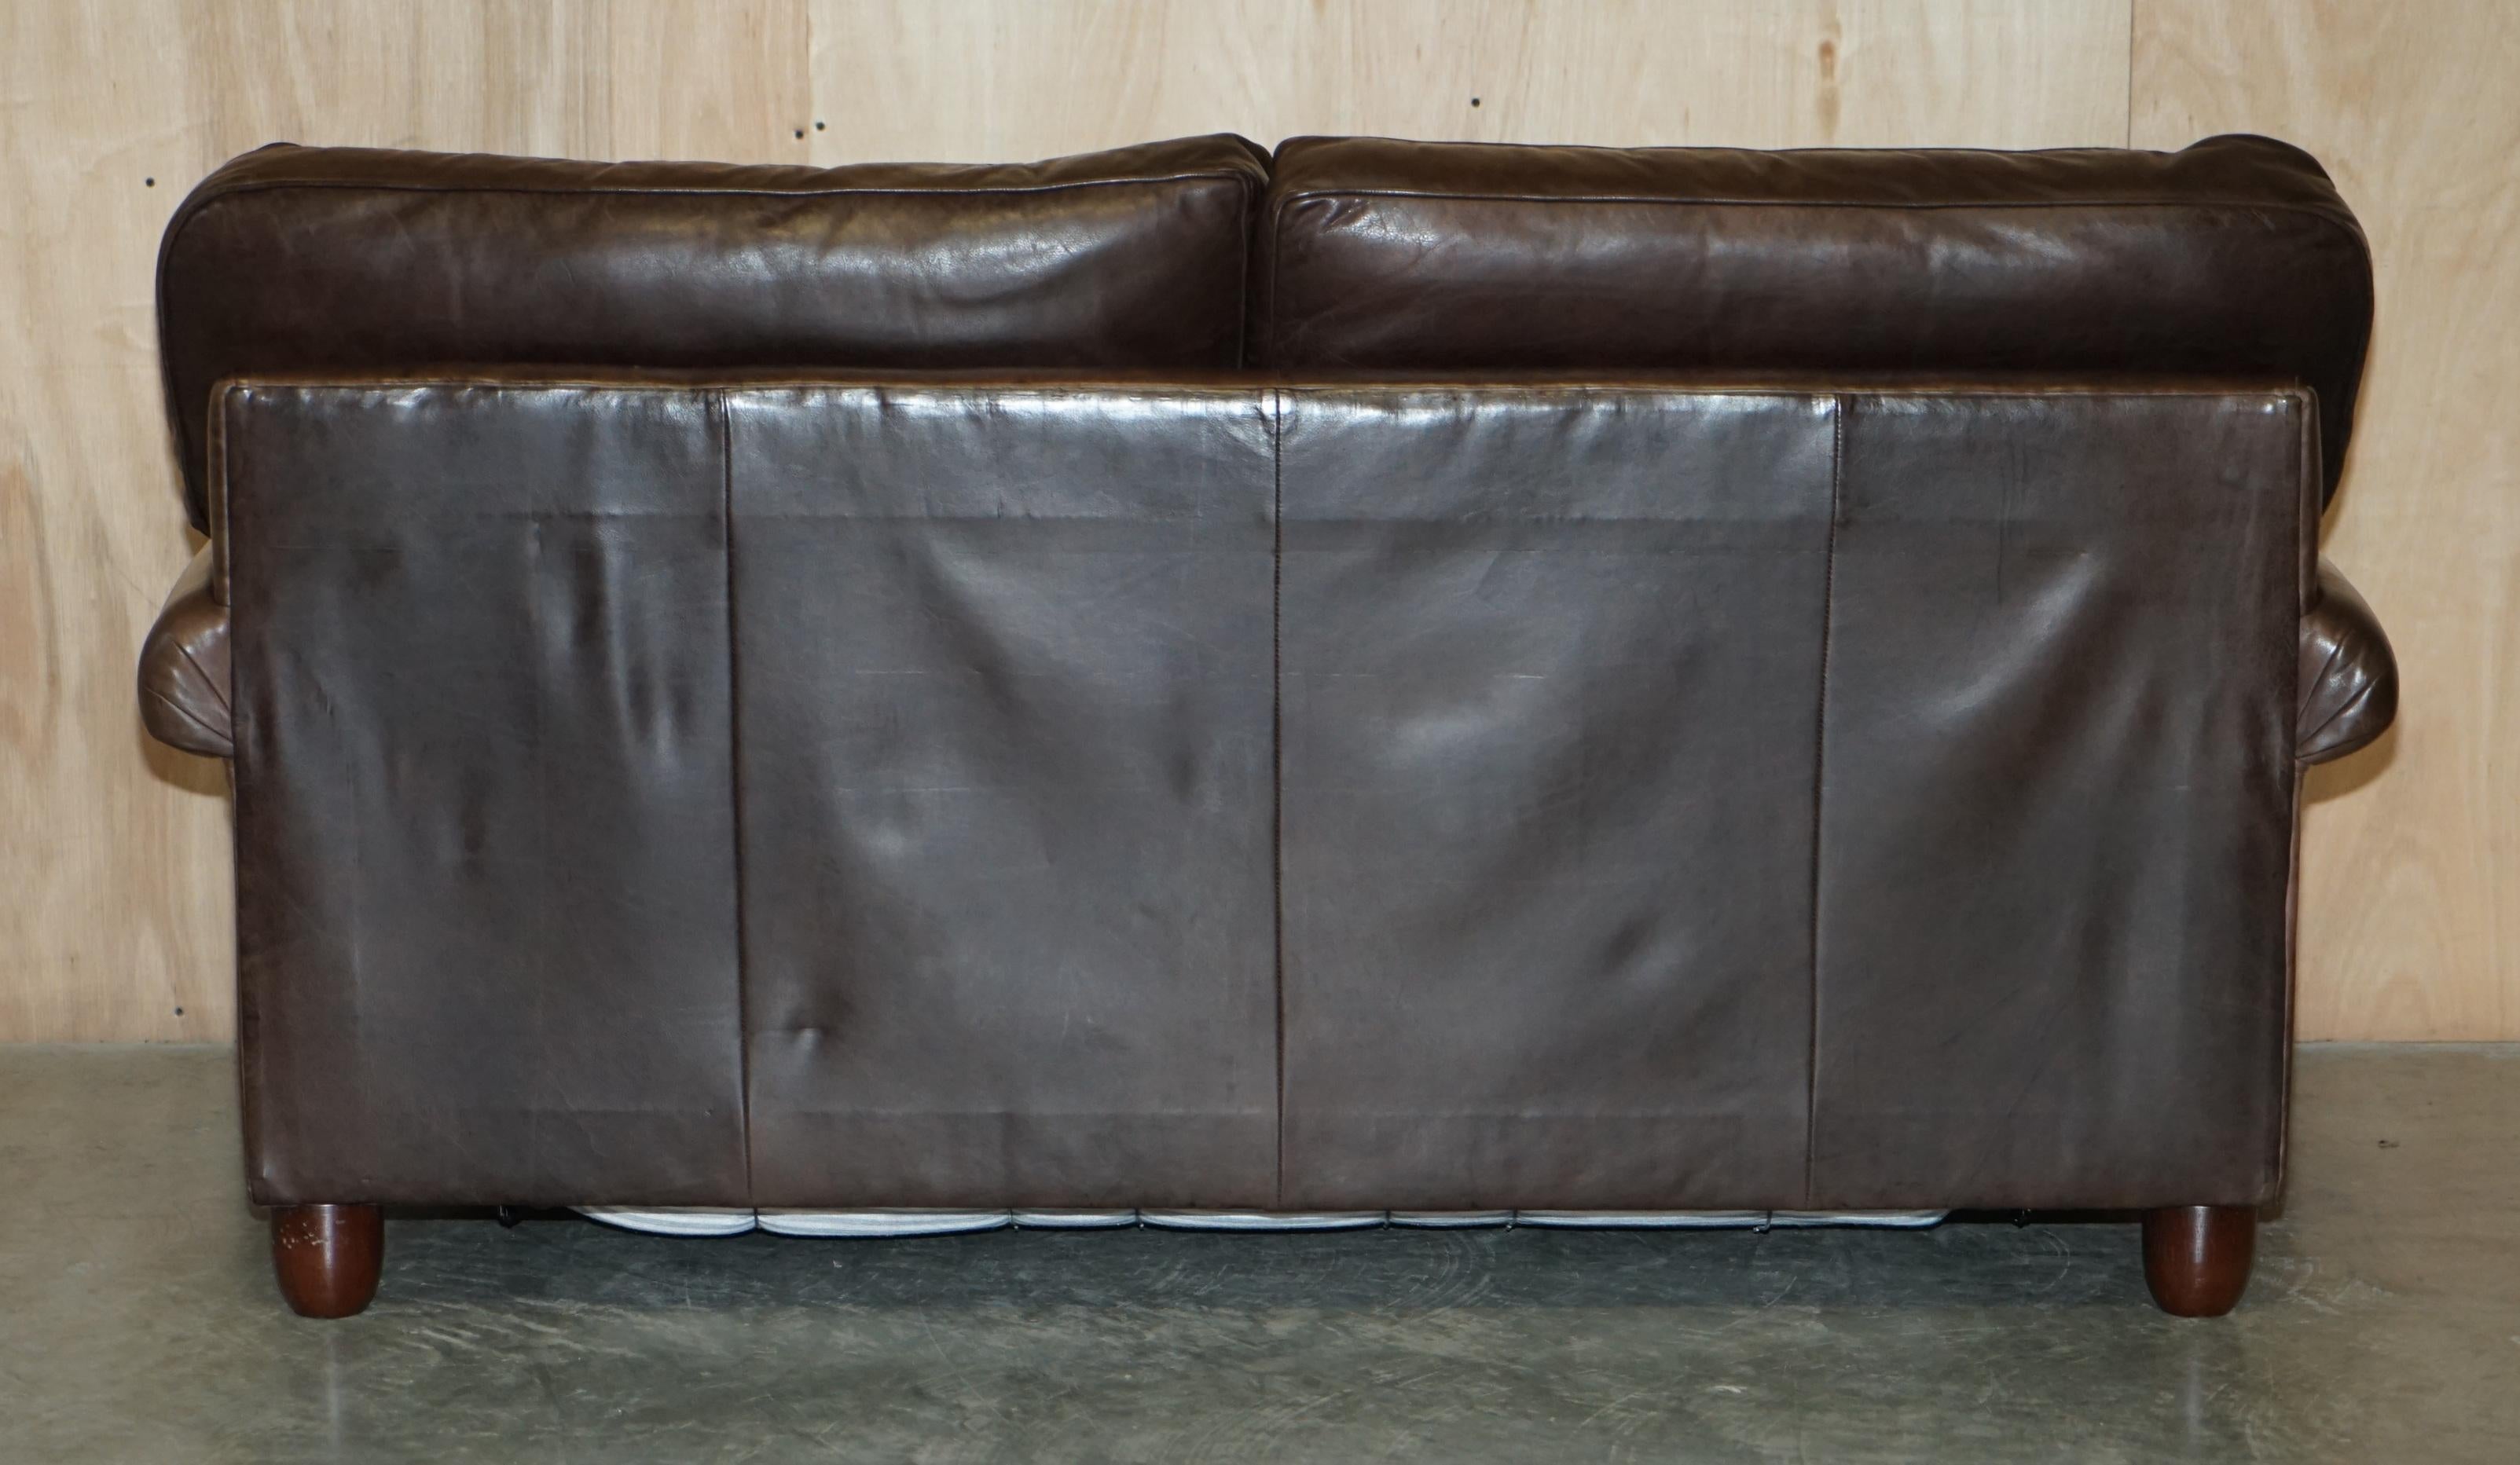 Lovely Heritage Brown Leather Laura Ashley Mortimer Sofabed in Very Nice Order For Sale 3